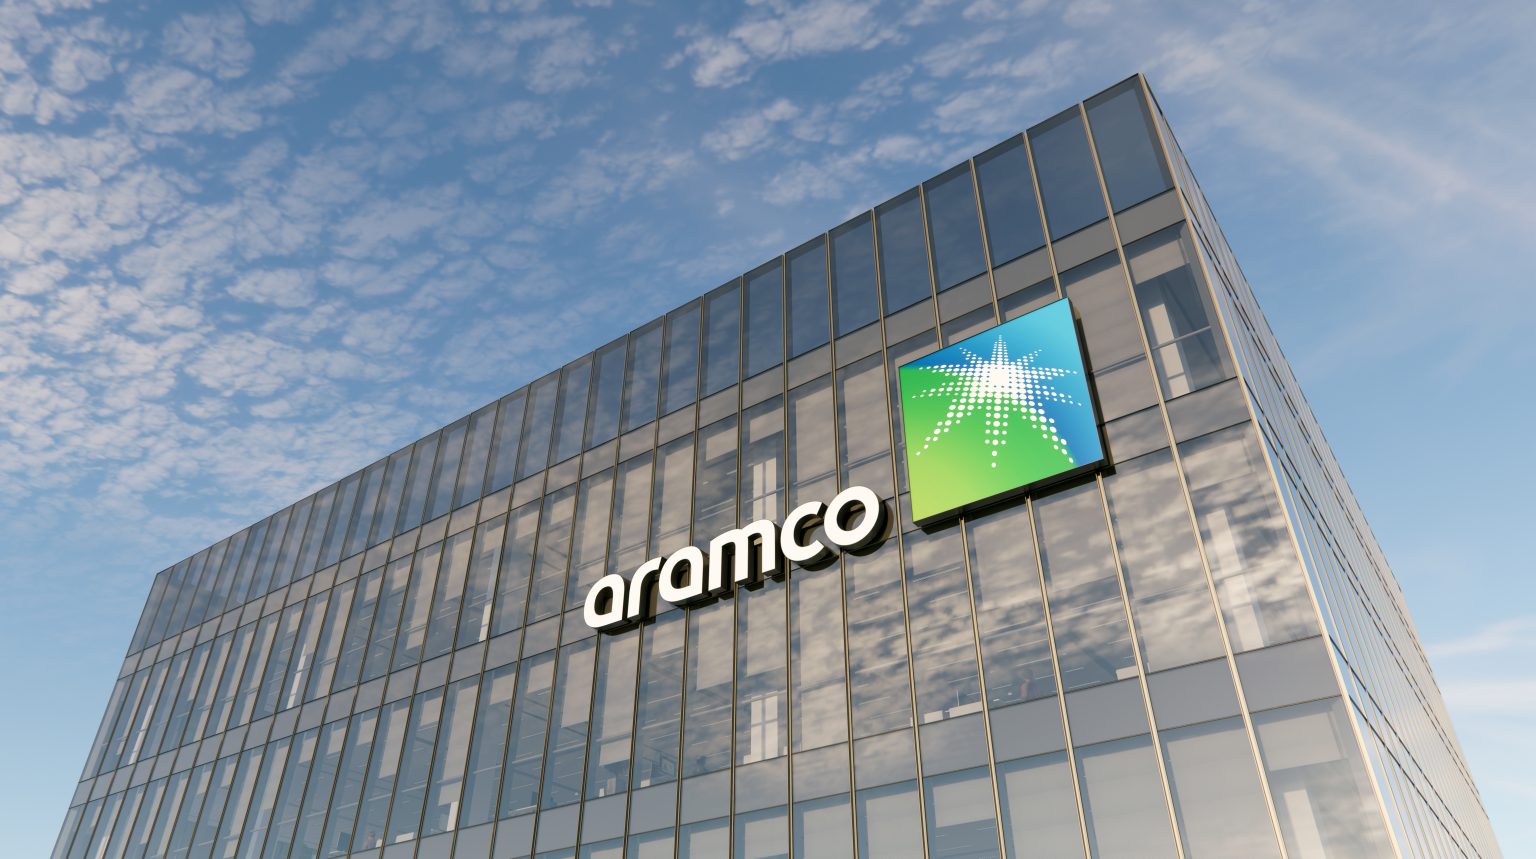 The decision will increase Aramco Venture's total investment allocation from $3 to $7 billion